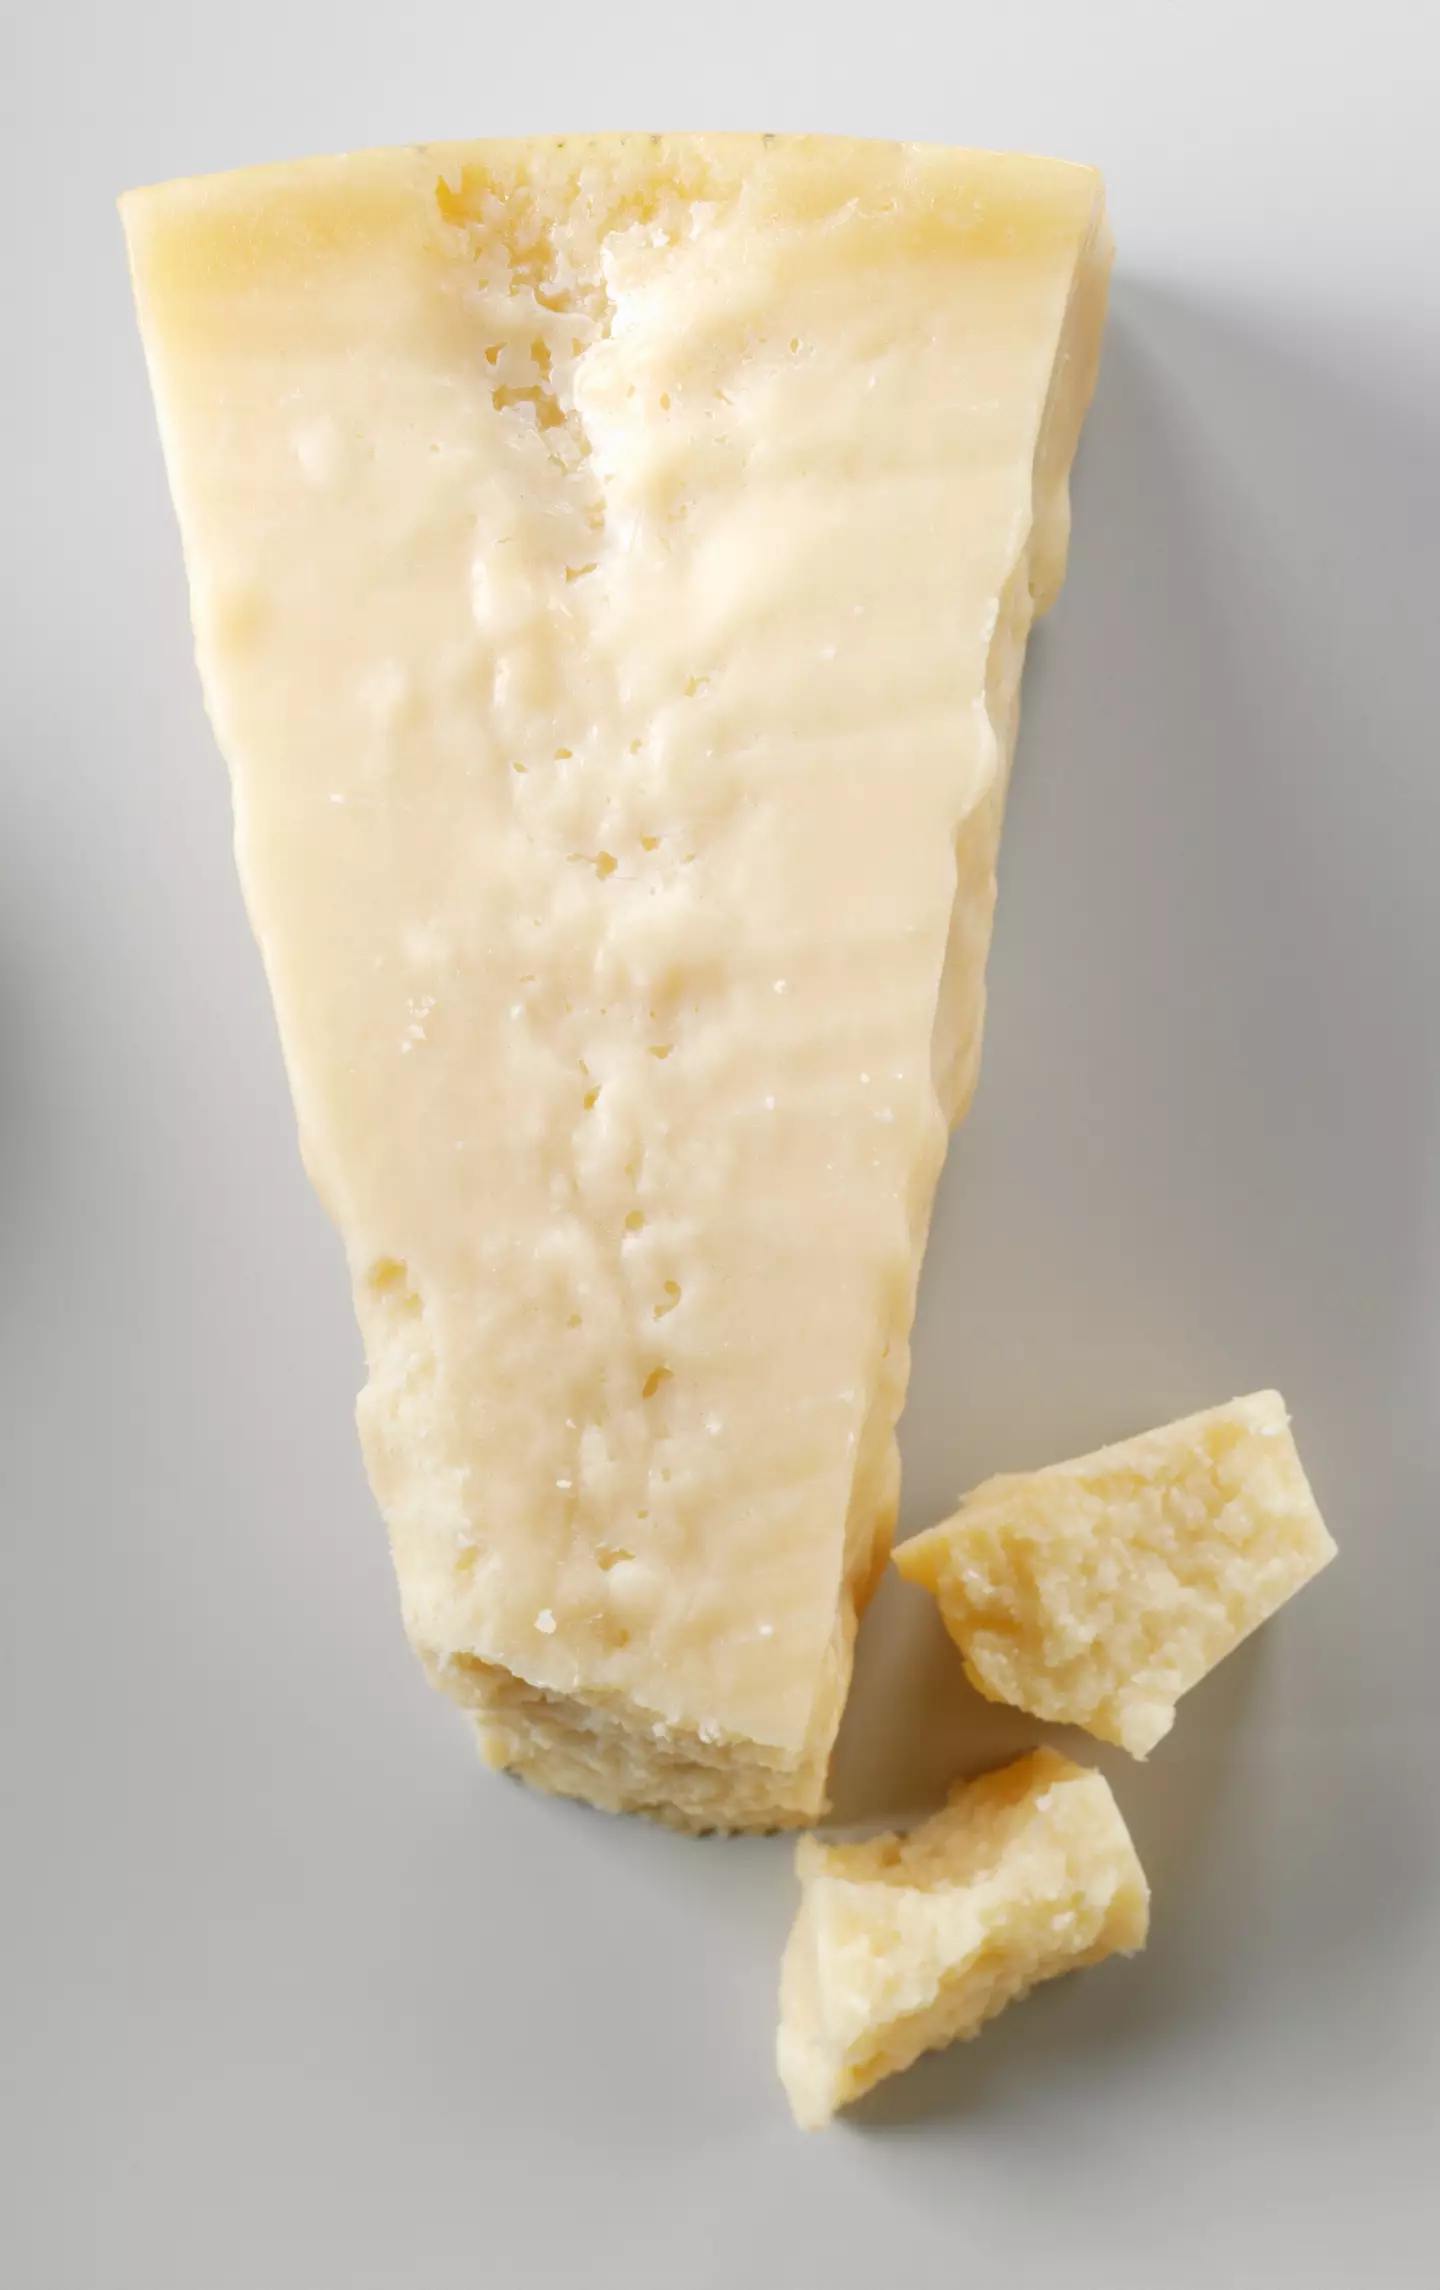 The cheese is made using rennet - which is a calf's stomach.